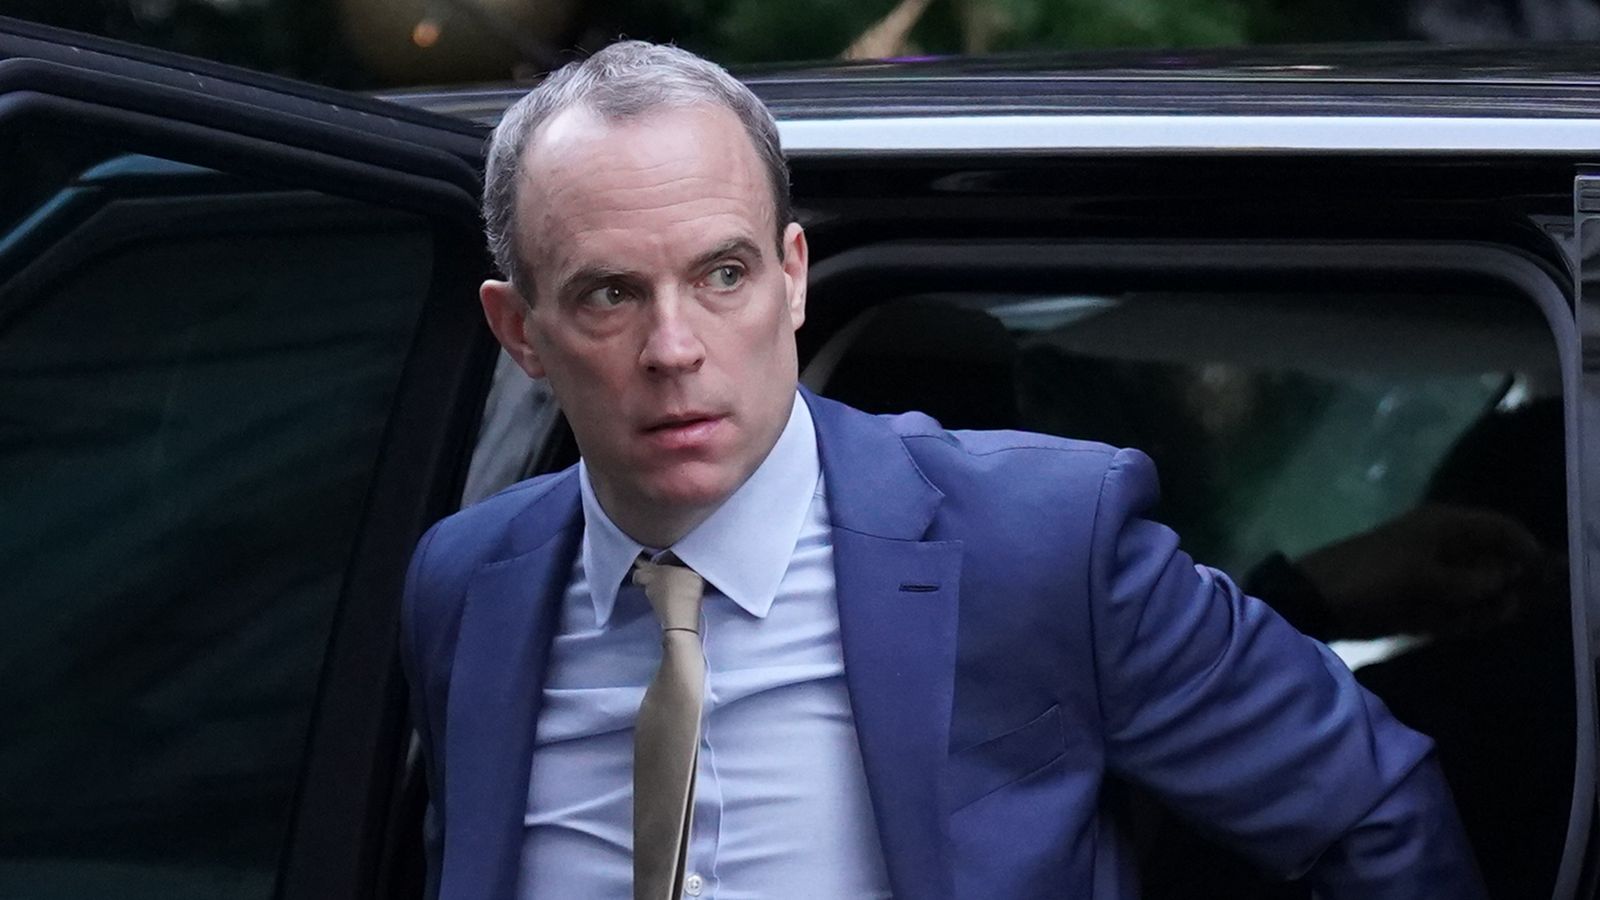 Dominic Raab 'ruined people's lives', say officials who worked with him as bullying inquiry nears conclusion